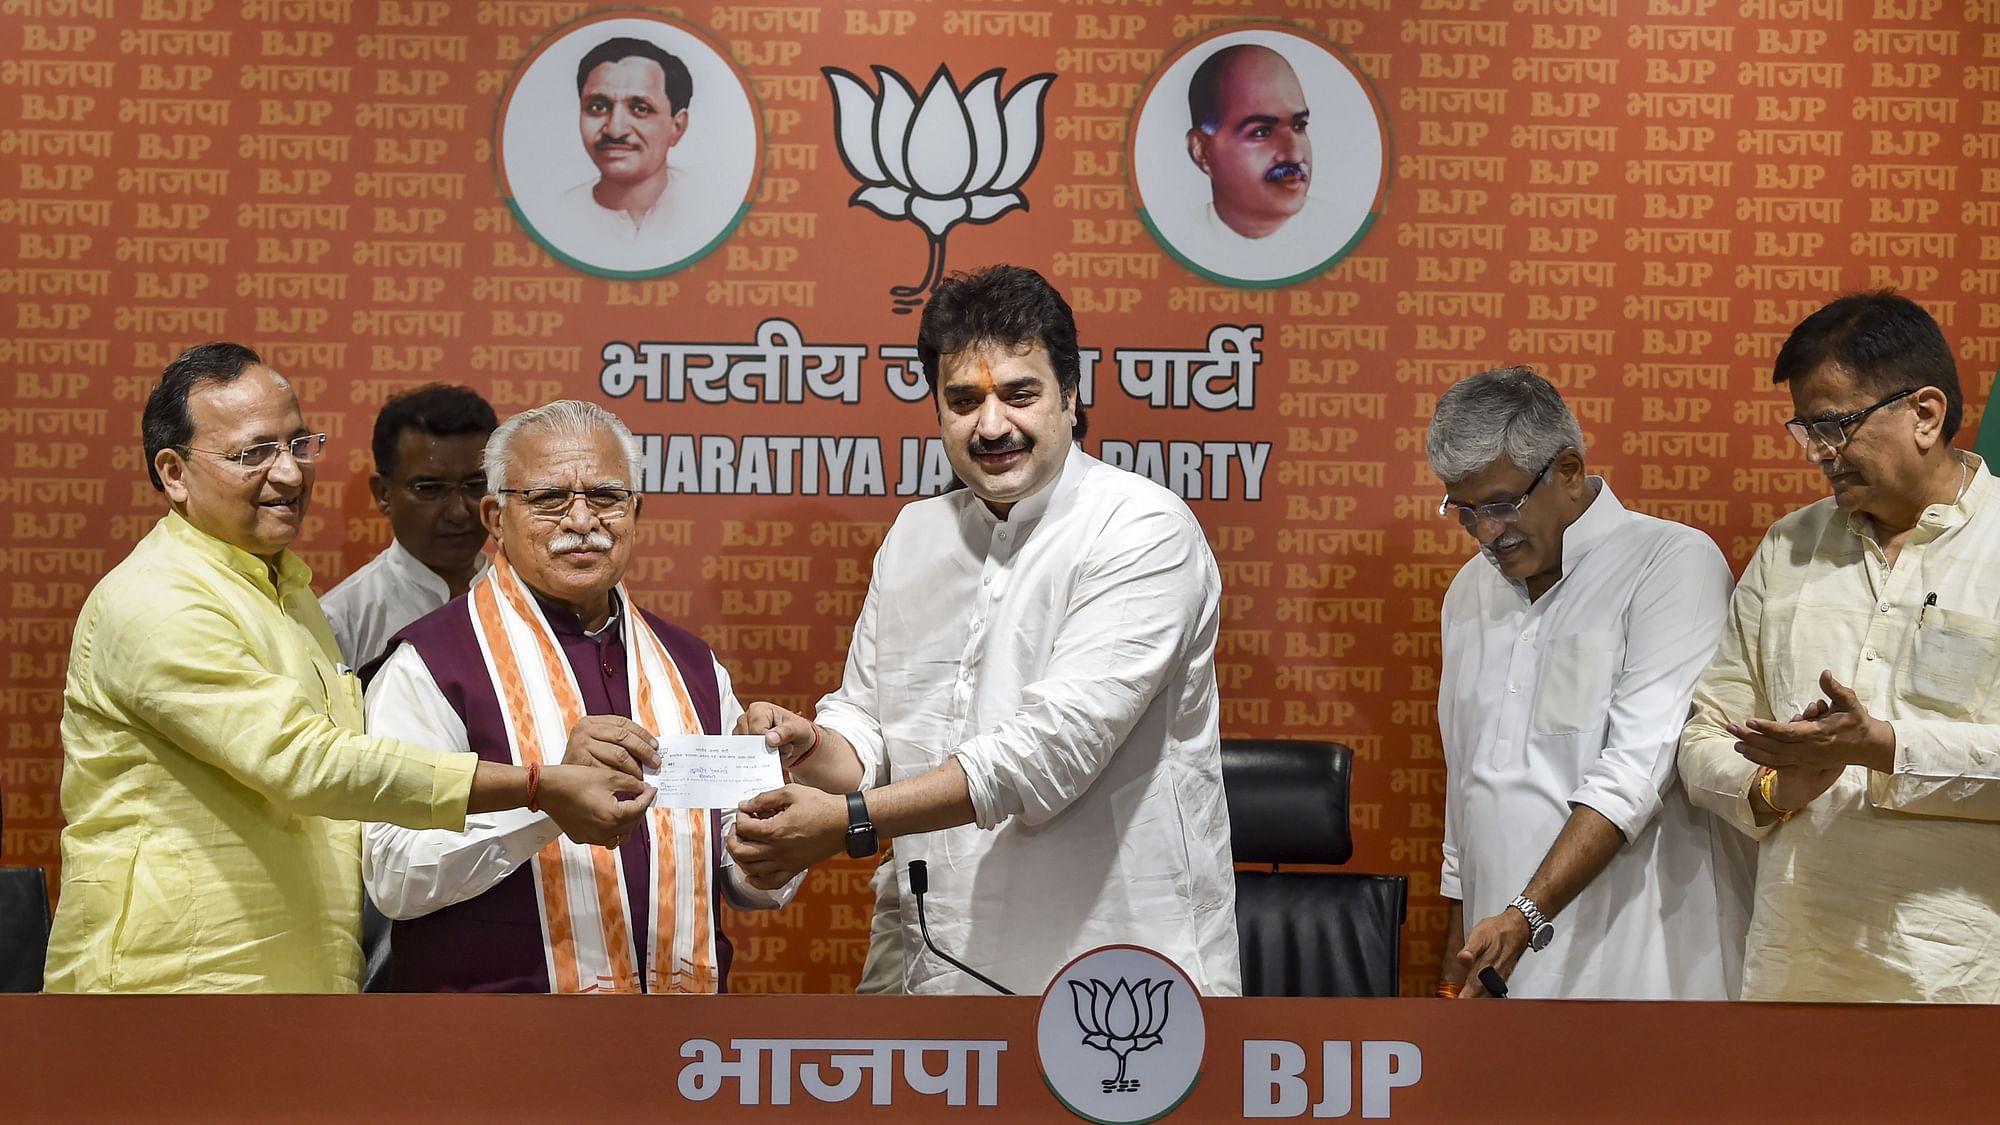 <div class="paragraphs"><p>The duo joined the party in the presence of Haryana Chief Minister Manohar Lal Khattar, Union Minister Gajendra Singh Shekhawat and BJP general secretary Arun Singh.</p></div>